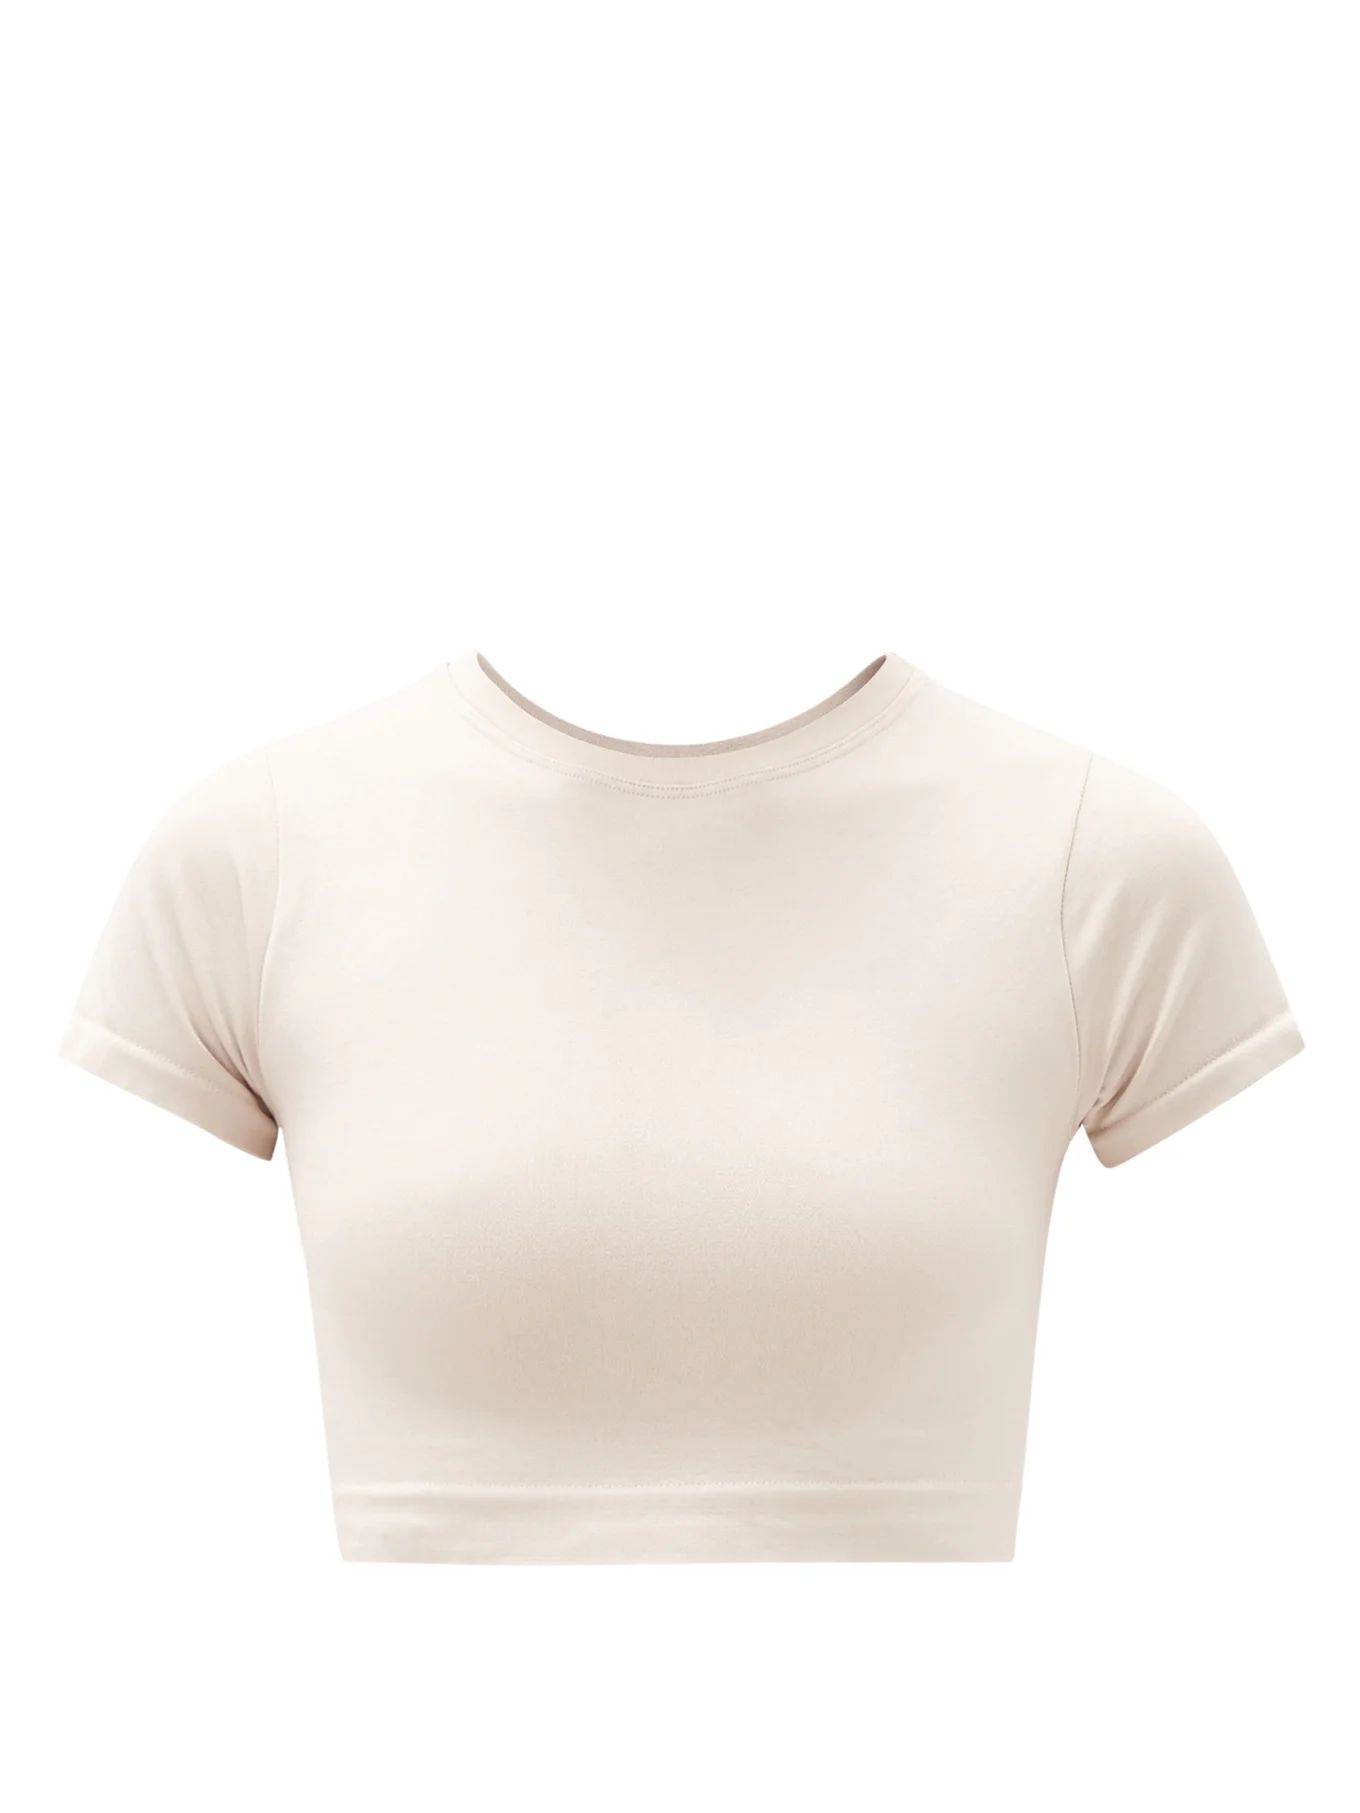 Mindful stretch-jersey cropped top | PRISM² | Matches (US)